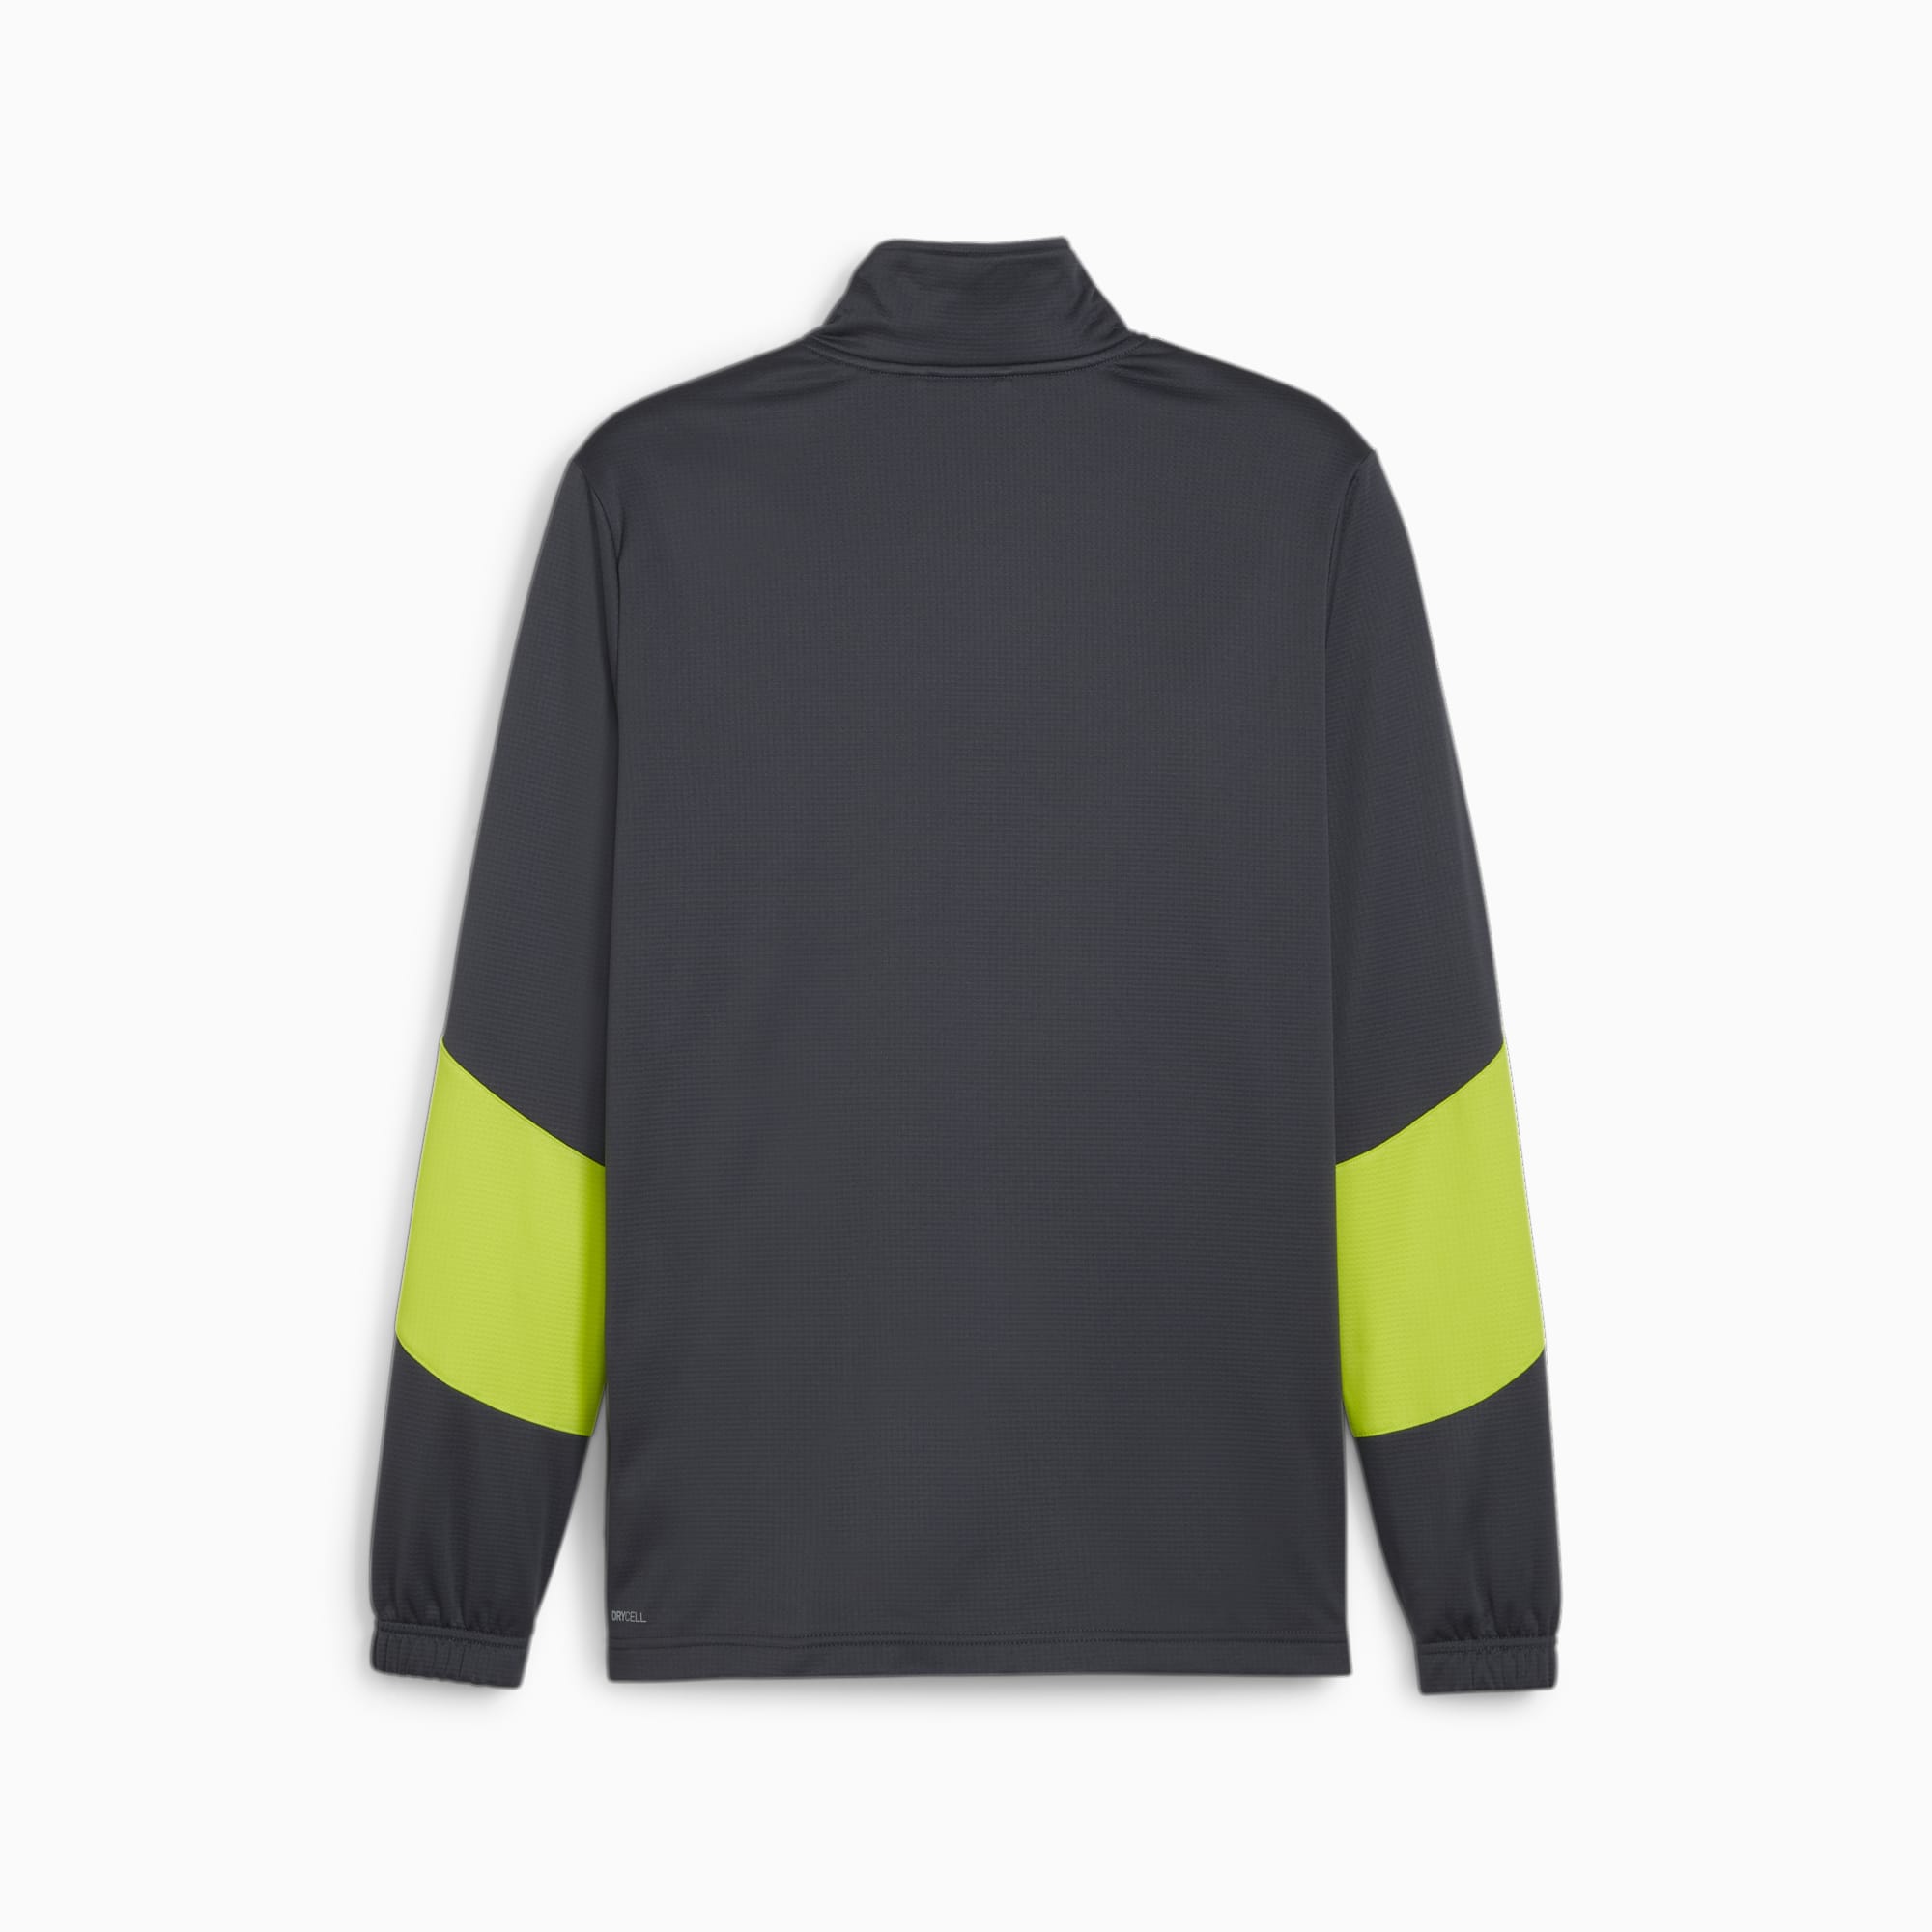 Puma Classics T7 track jacket in black and lime